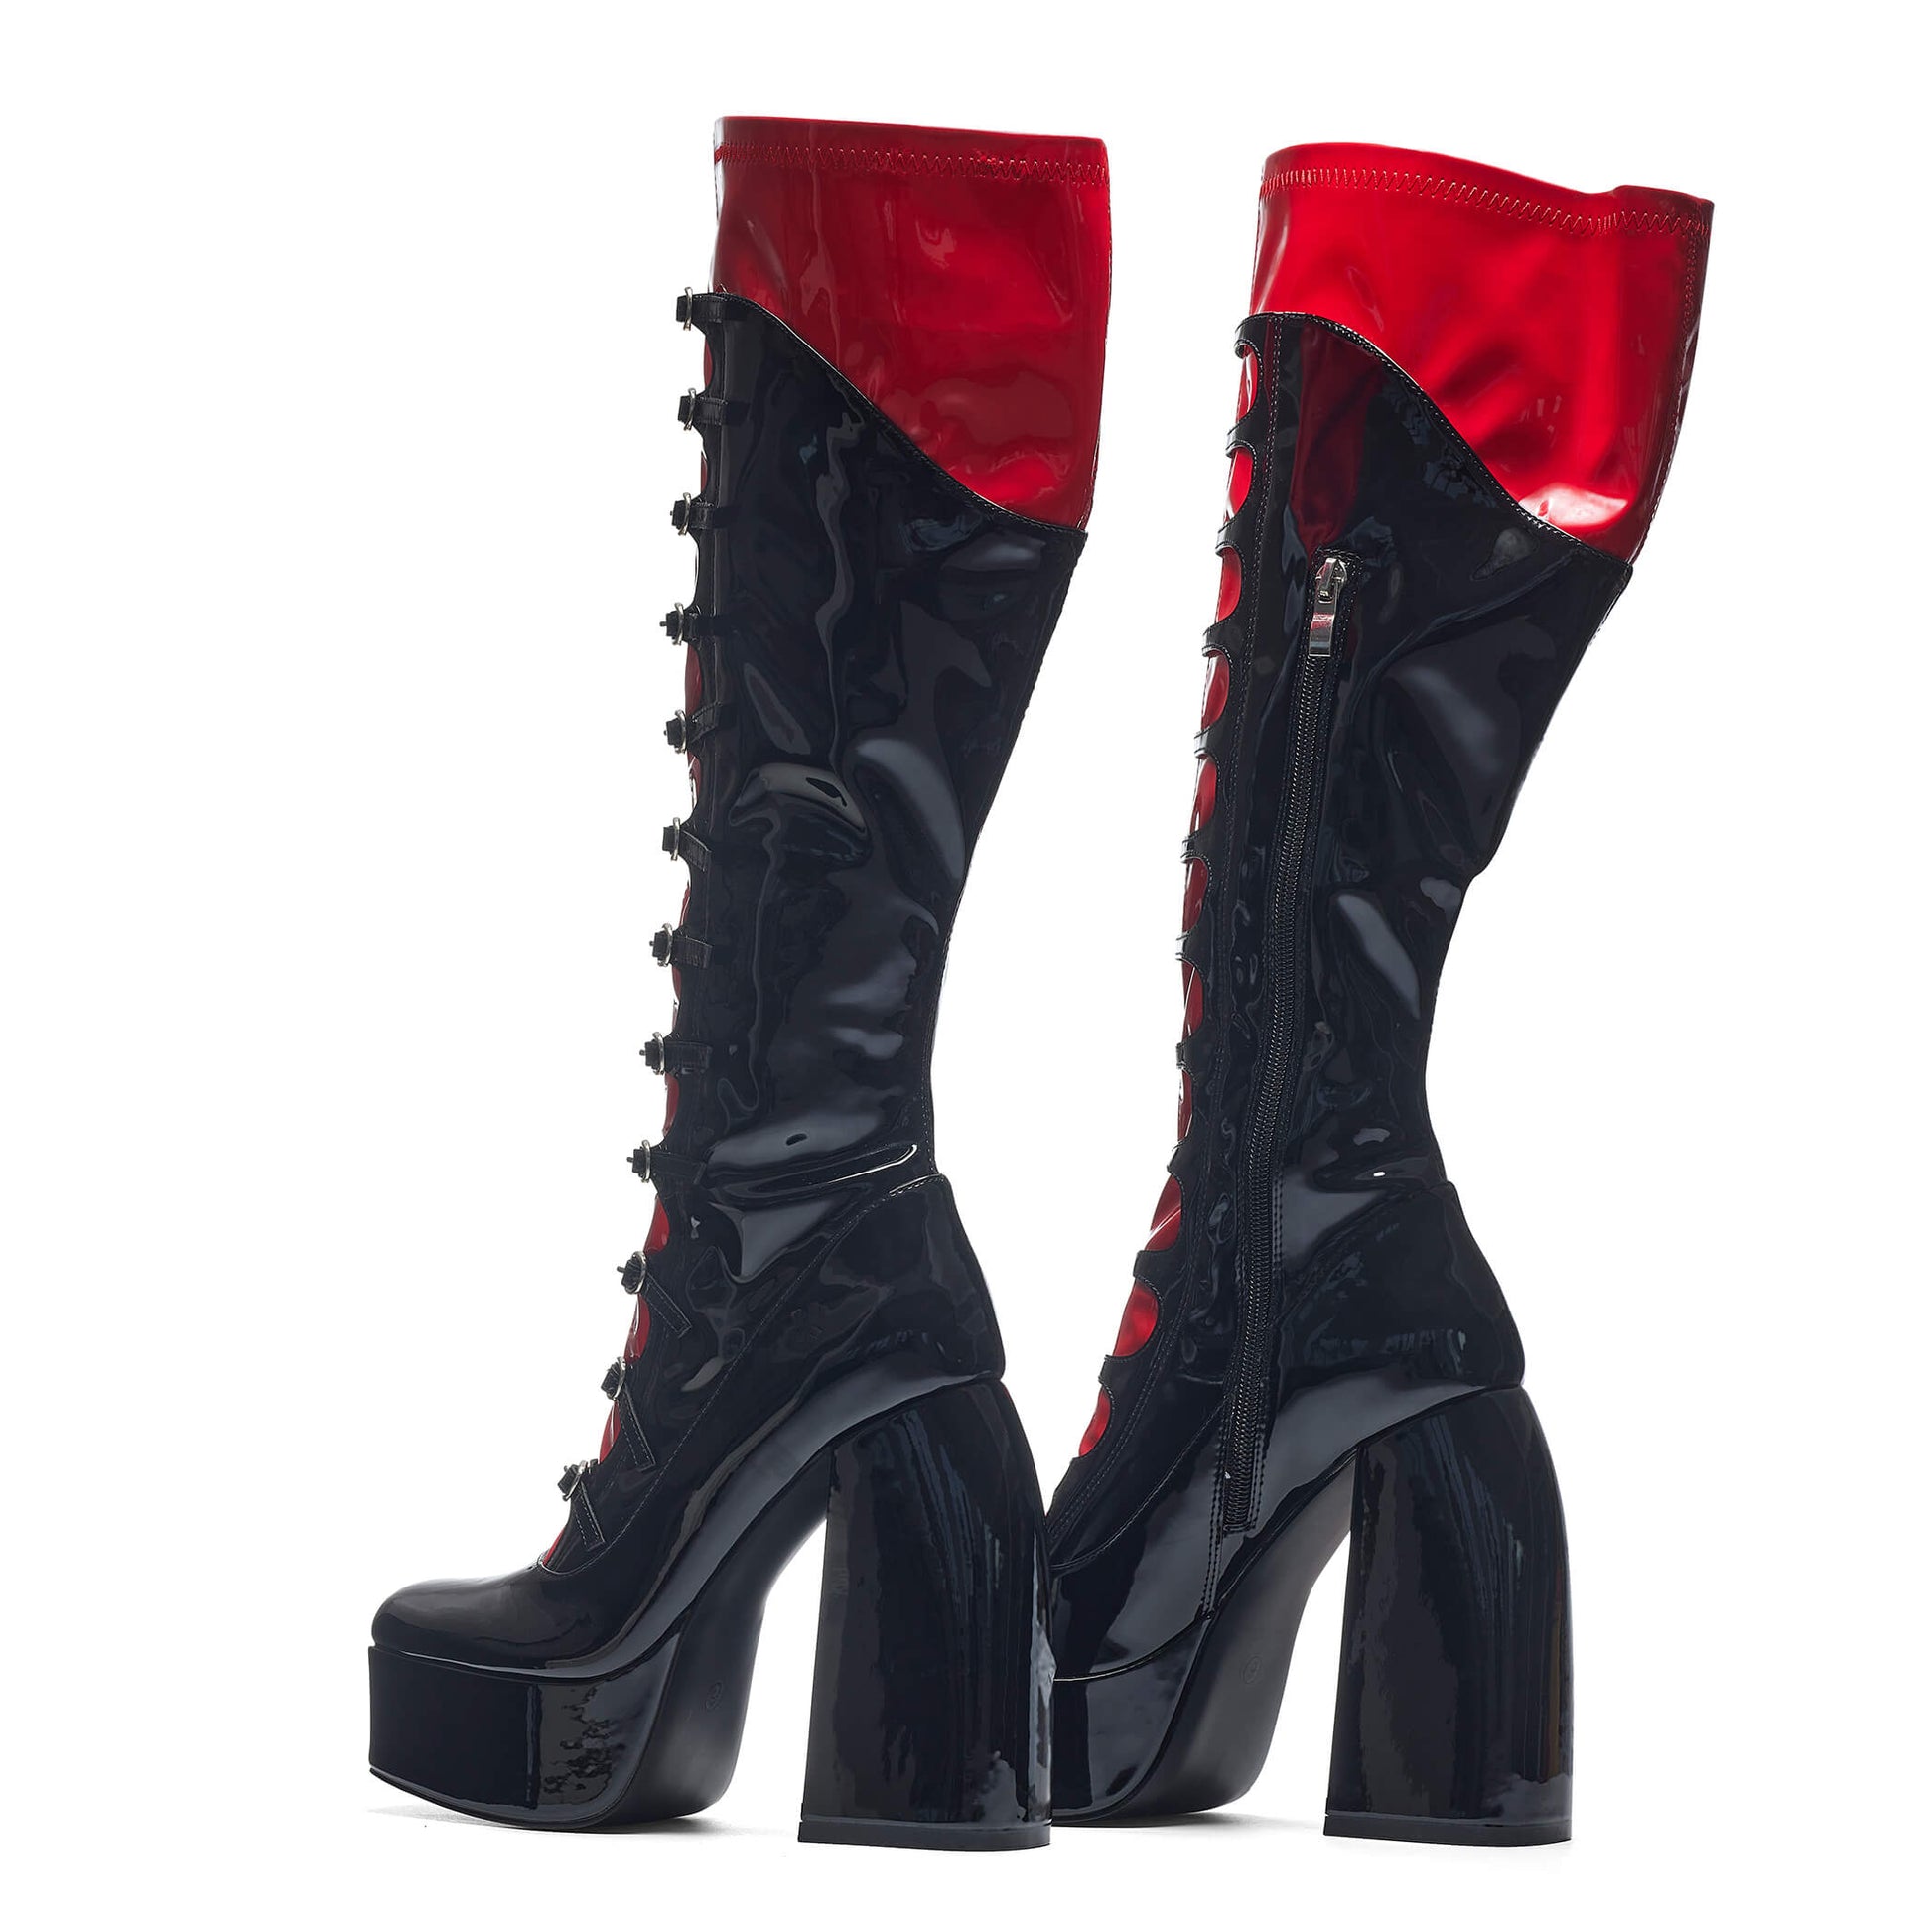 Ritual State Patent Long Boots - Red - Long Boots - KOI Footwear - Red - Back View